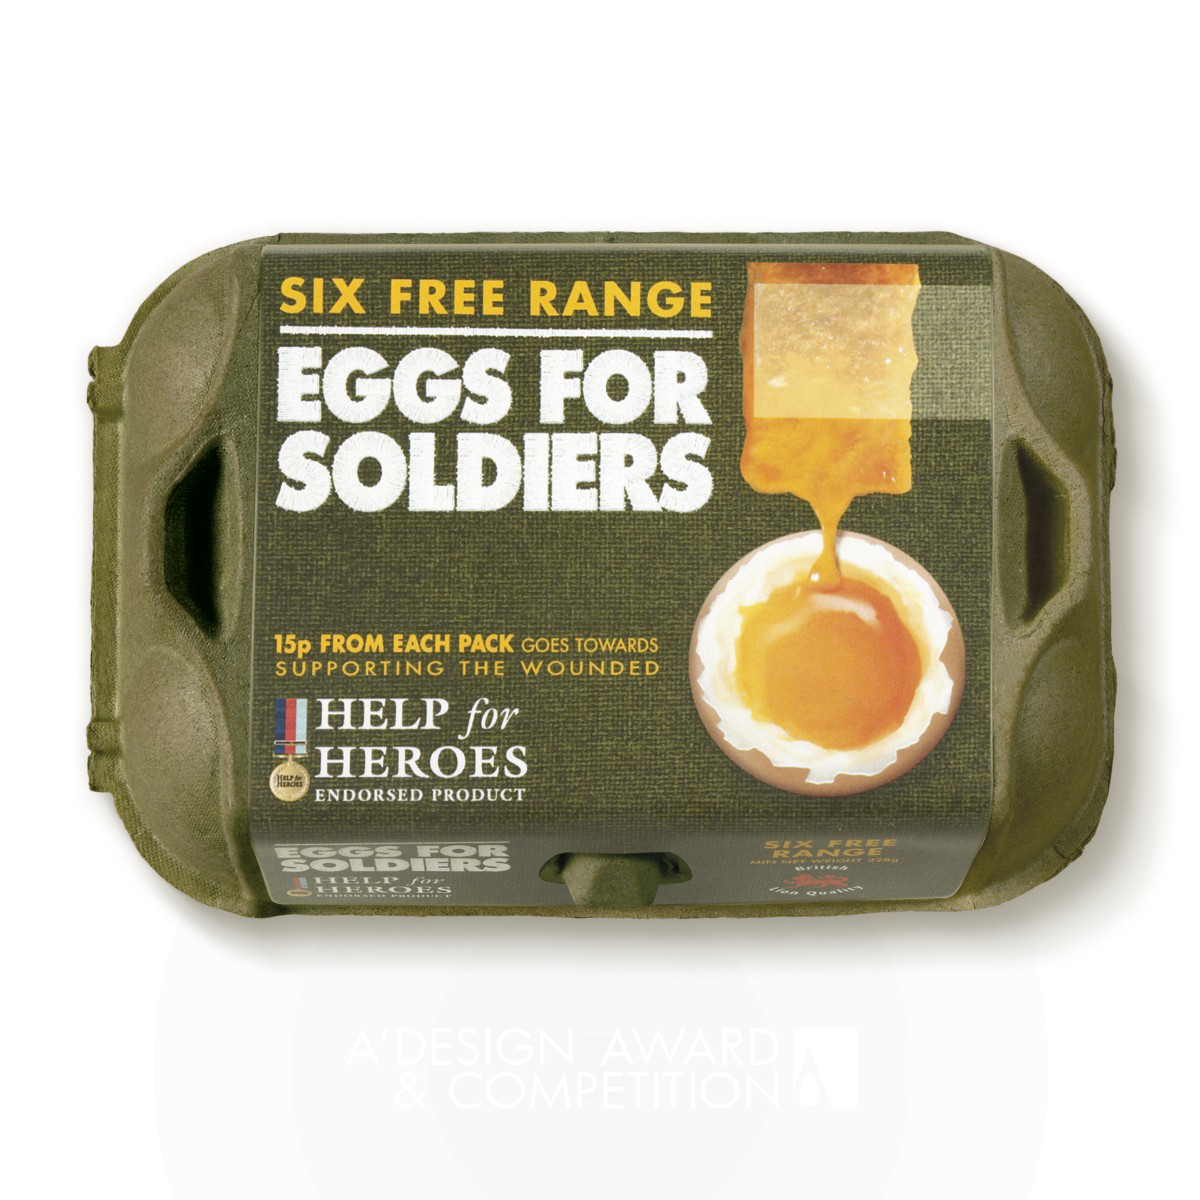 Eggs for Soldiers Free range eggs by Springetts Brand Design